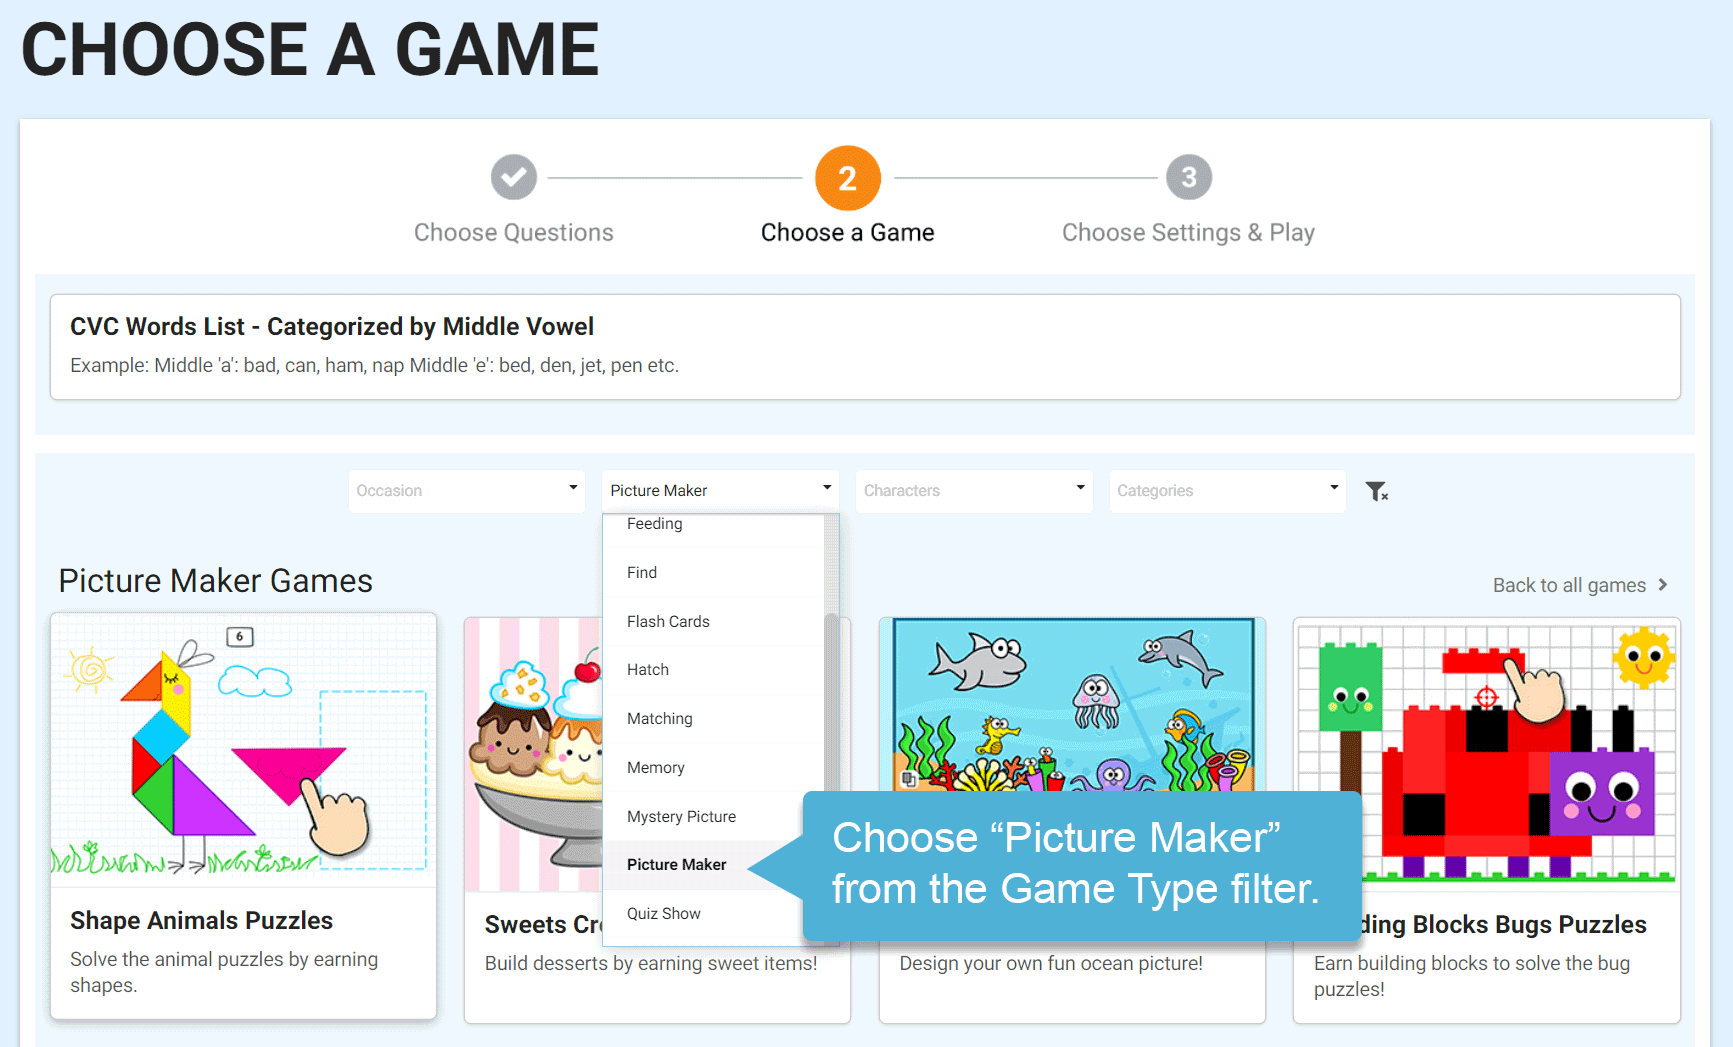 choose-a-game-game-type-picturemaker.gif